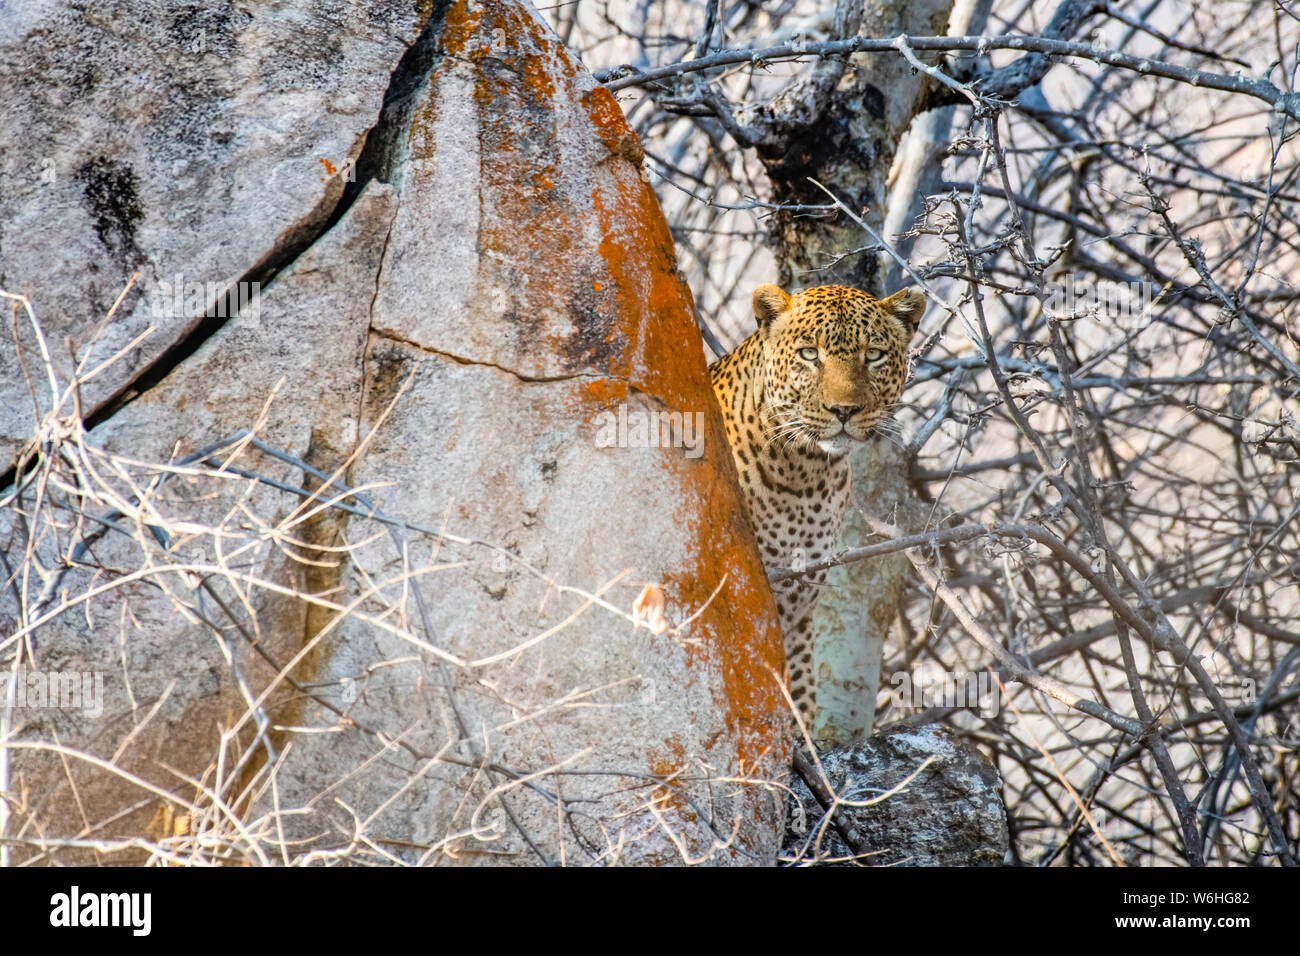 Leopard (Panthera pardus) peers from behind a lichen-covered rock in Ruaha National Park; Tanzania Stock Photo